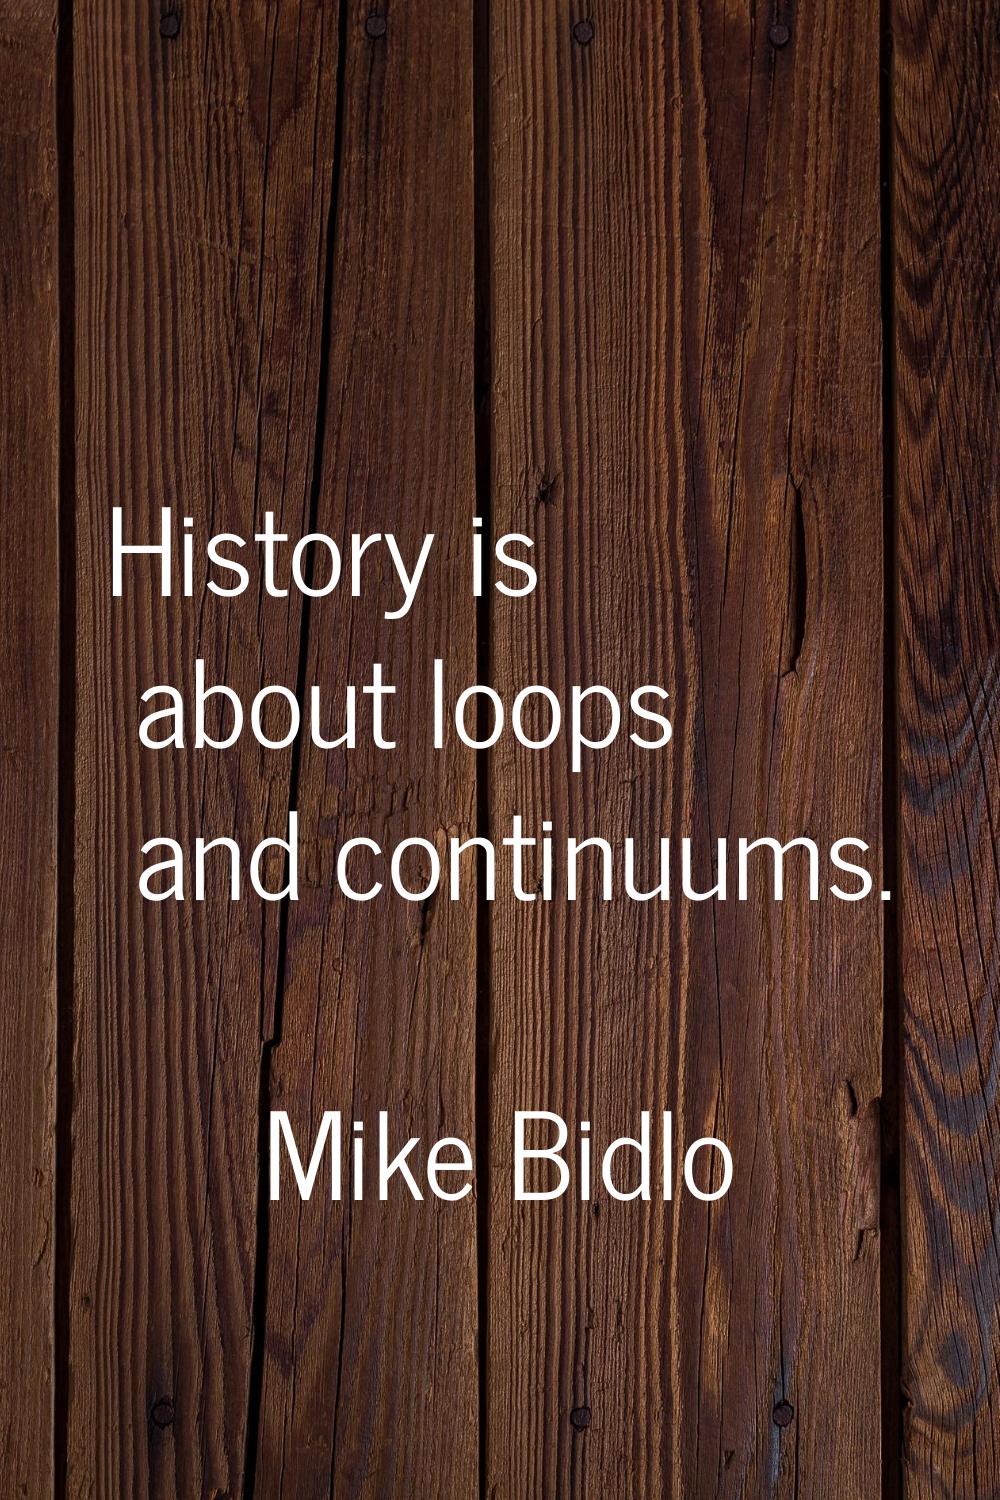 History is about loops and continuums.